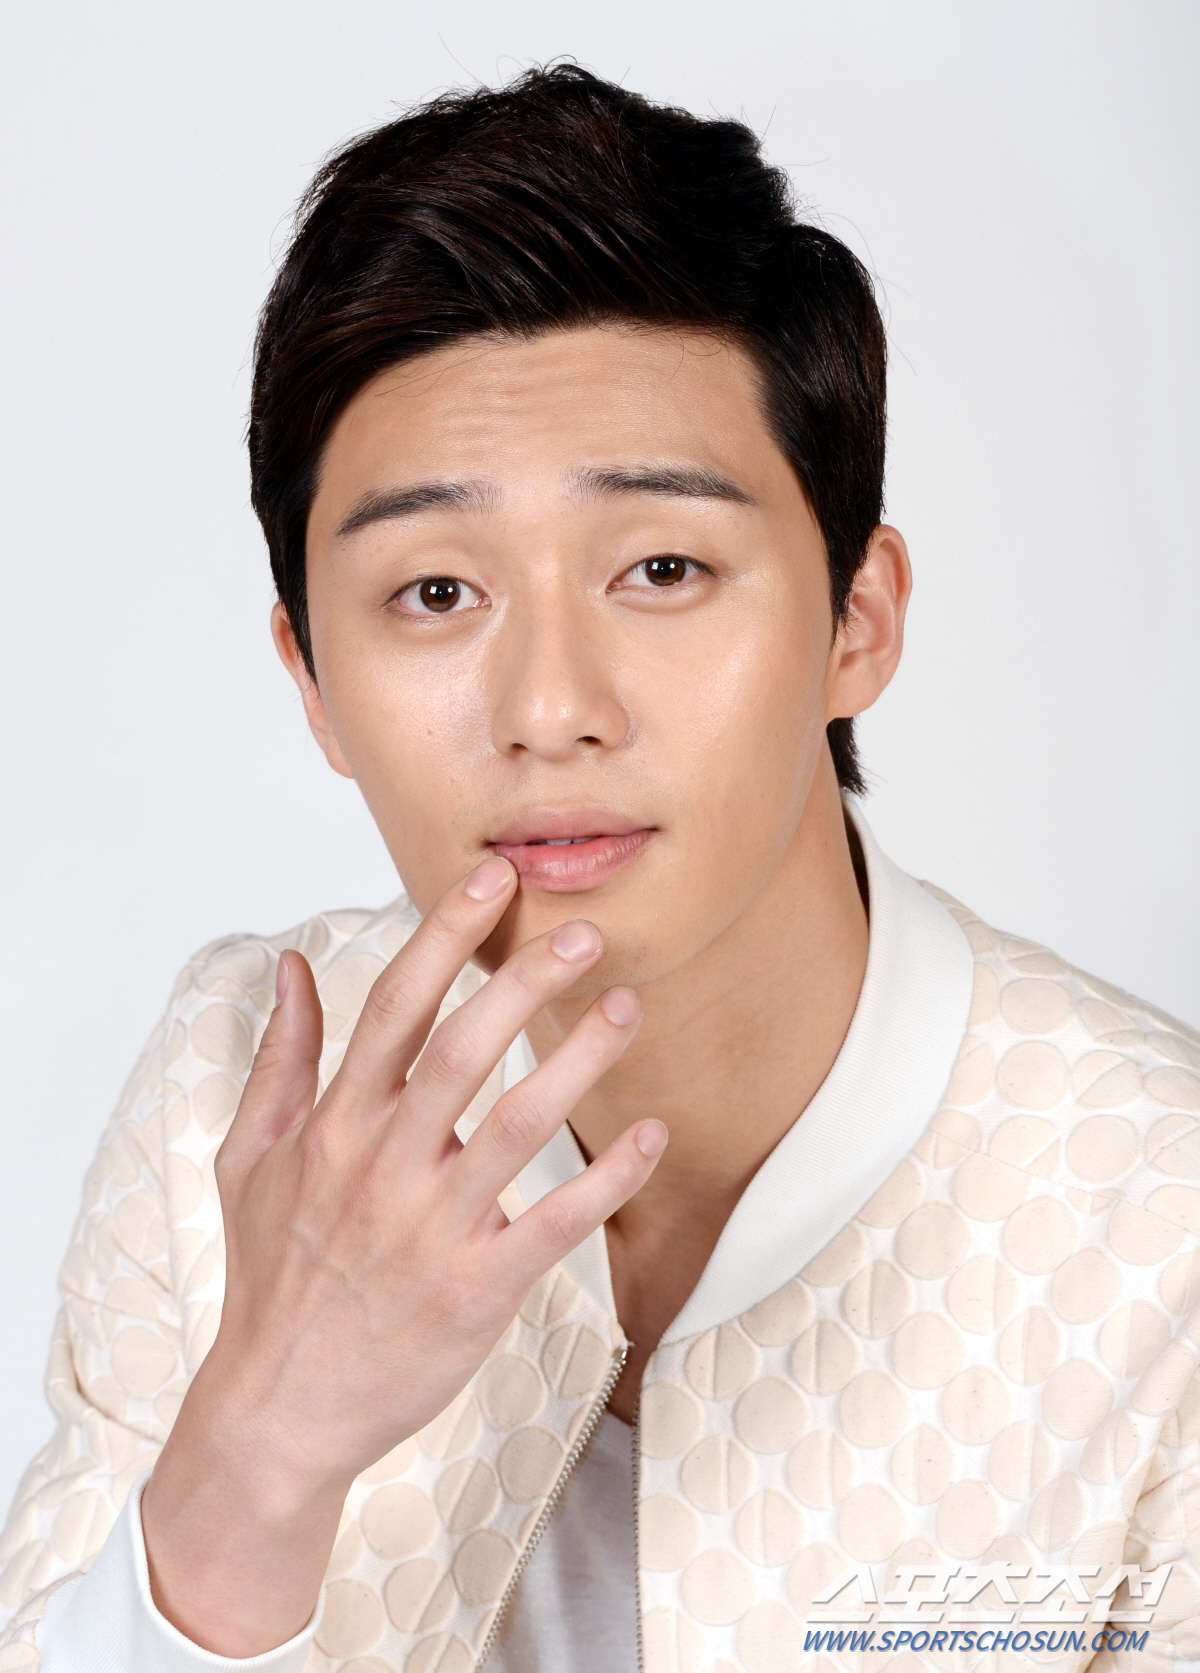 In Golden Up, Park Seo-joon played the role of Park Hyun-tae, the youngest son of a cute child who has become accustomed to deviations because of his wounds.He has not been able to clean up his relationship with the long-time couple, so he has Acted a playboy who makes his wife, Chung Mong-hyun (Baek Jin-hee), who is married.Park Seo-joon, a used rookie in his third year of debut, received a love of A house theater female fans by expressing stable inner acting and sad feelings about his loved ones in Warm Words.In She Was Pretty, Park Seo-joon was transformed from fat to perfect man, and he caught his attention with Hye-jin (Hwang Jeong-eum) and a gentle love that crashed from Icon of his first love to Park Seo-joon in Ssam, My Way captured the womans heart by Acting the Godongman Character, which transformed from a former Taekwondo player to a martial arts player.In Why is Kim Secretary?, Lee Young-joon, a tough but sweet man, expressed the same couple chemistry as it is enough to inspire Park Min-young and his enthusiasm.